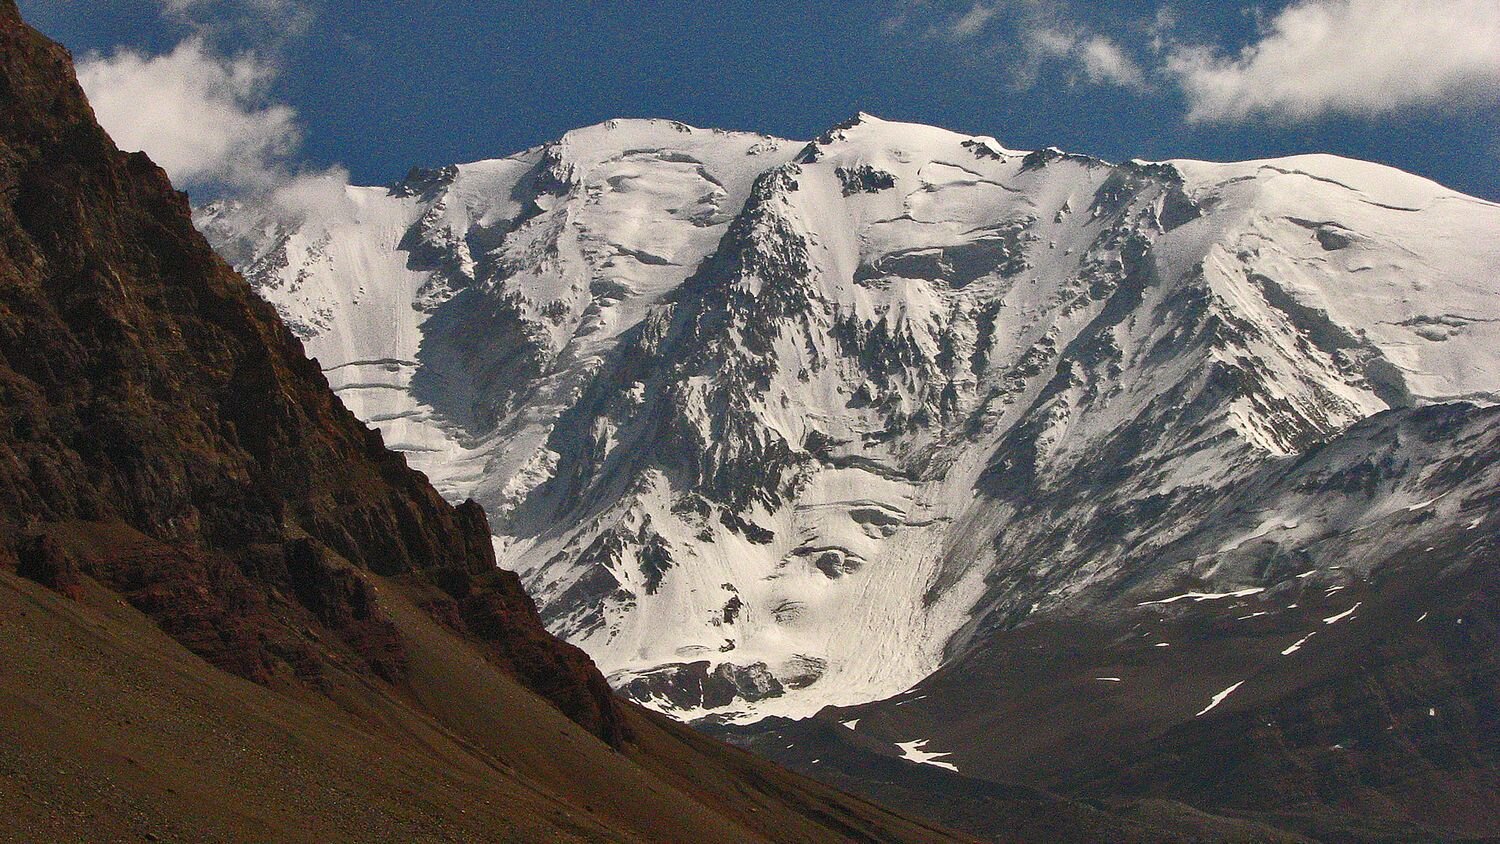 Aconcagua Ascent Training Course with Chile Montaña_10.jpg